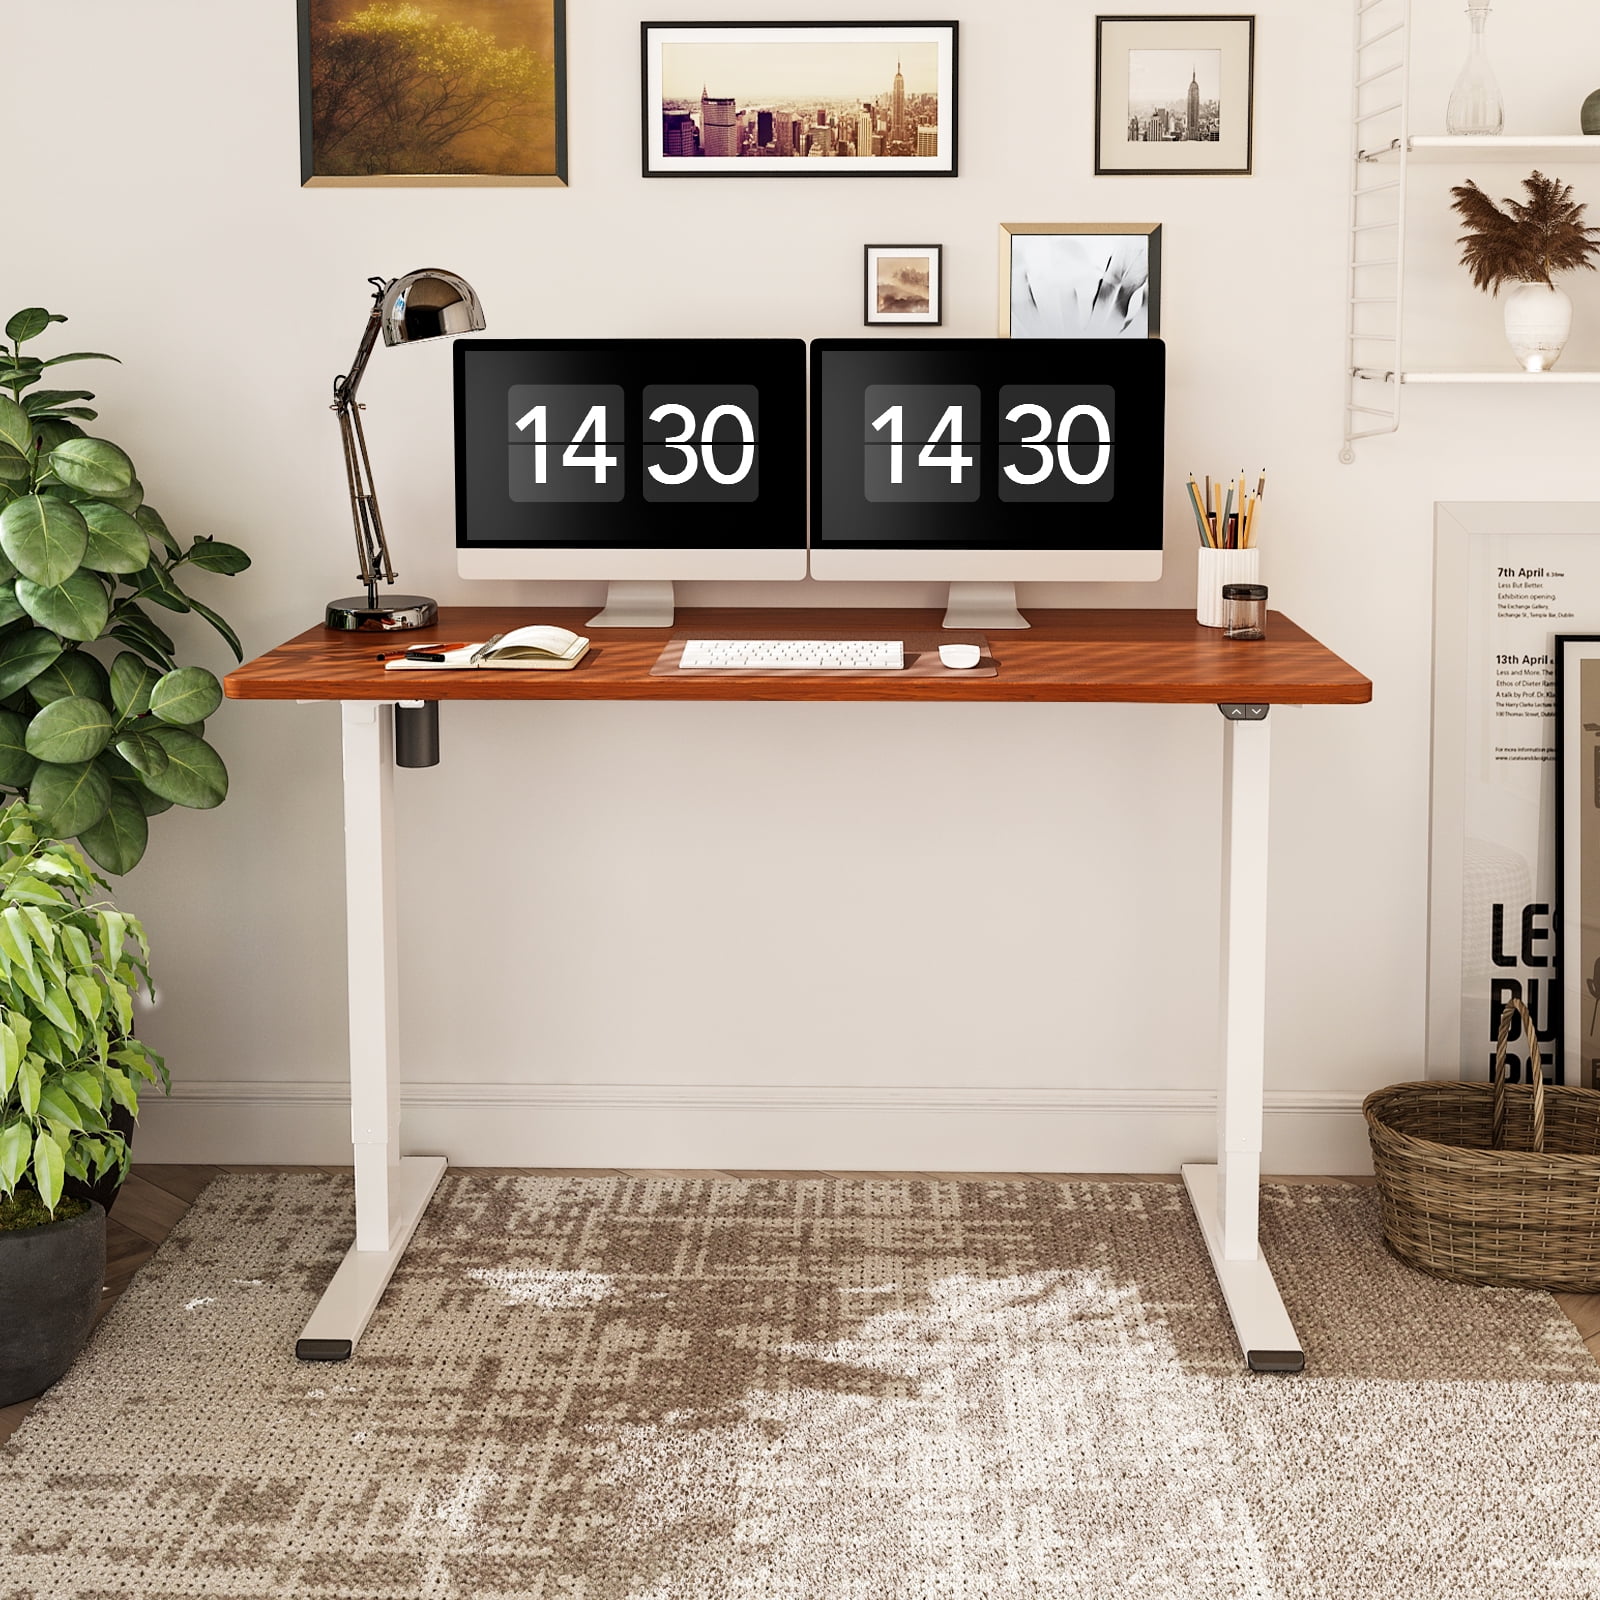 FLEXISPOT 55 x 28 Home Office Standing Desk Electric Height Adjustable Desk  with LED Memory Control - Bed Bath & Beyond - 35361295